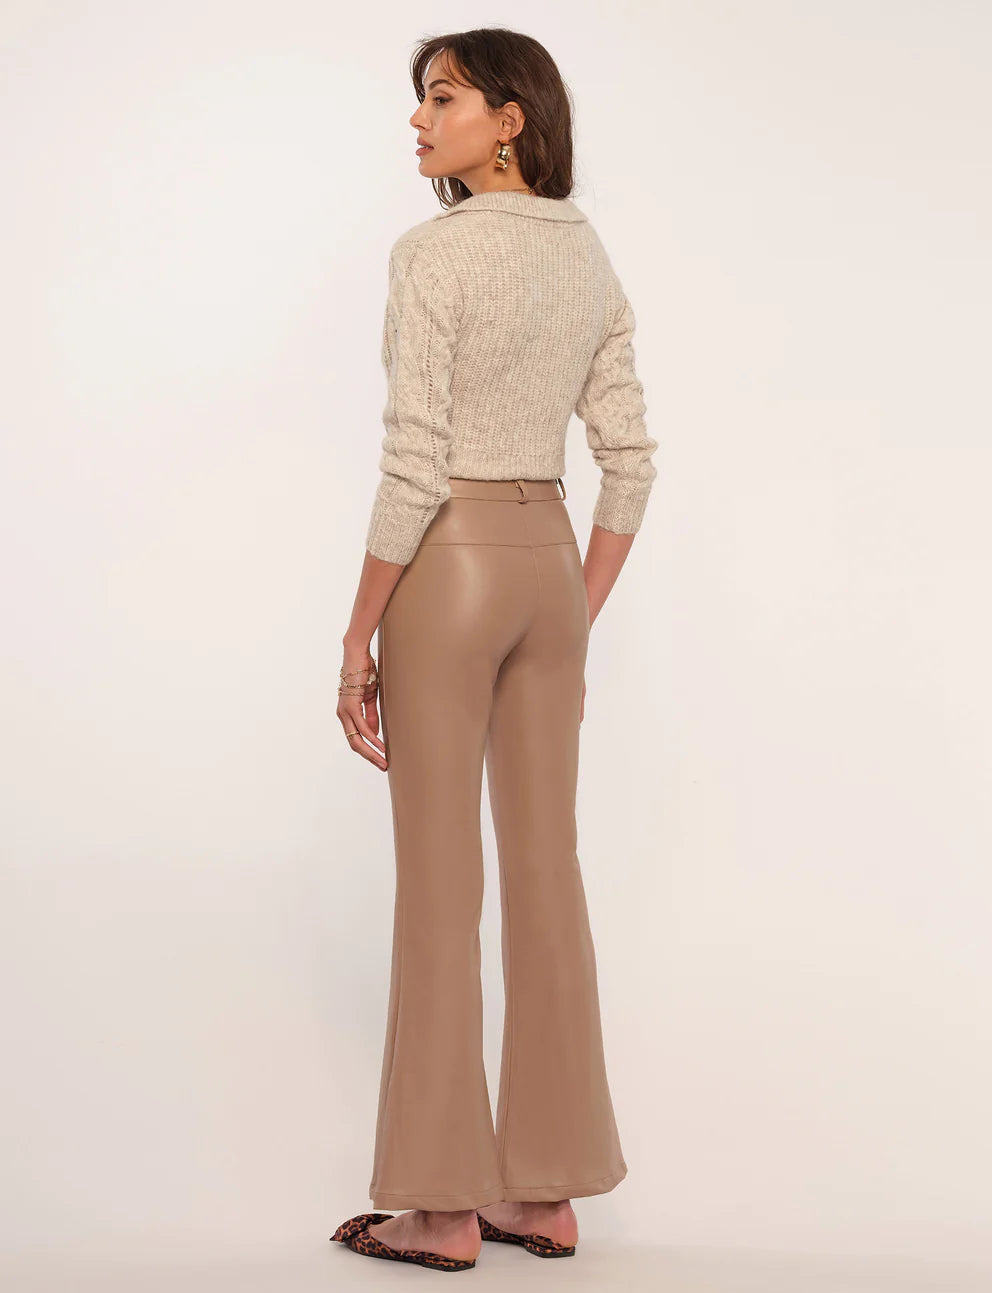 Suzette Faux Leather Pant in Camel